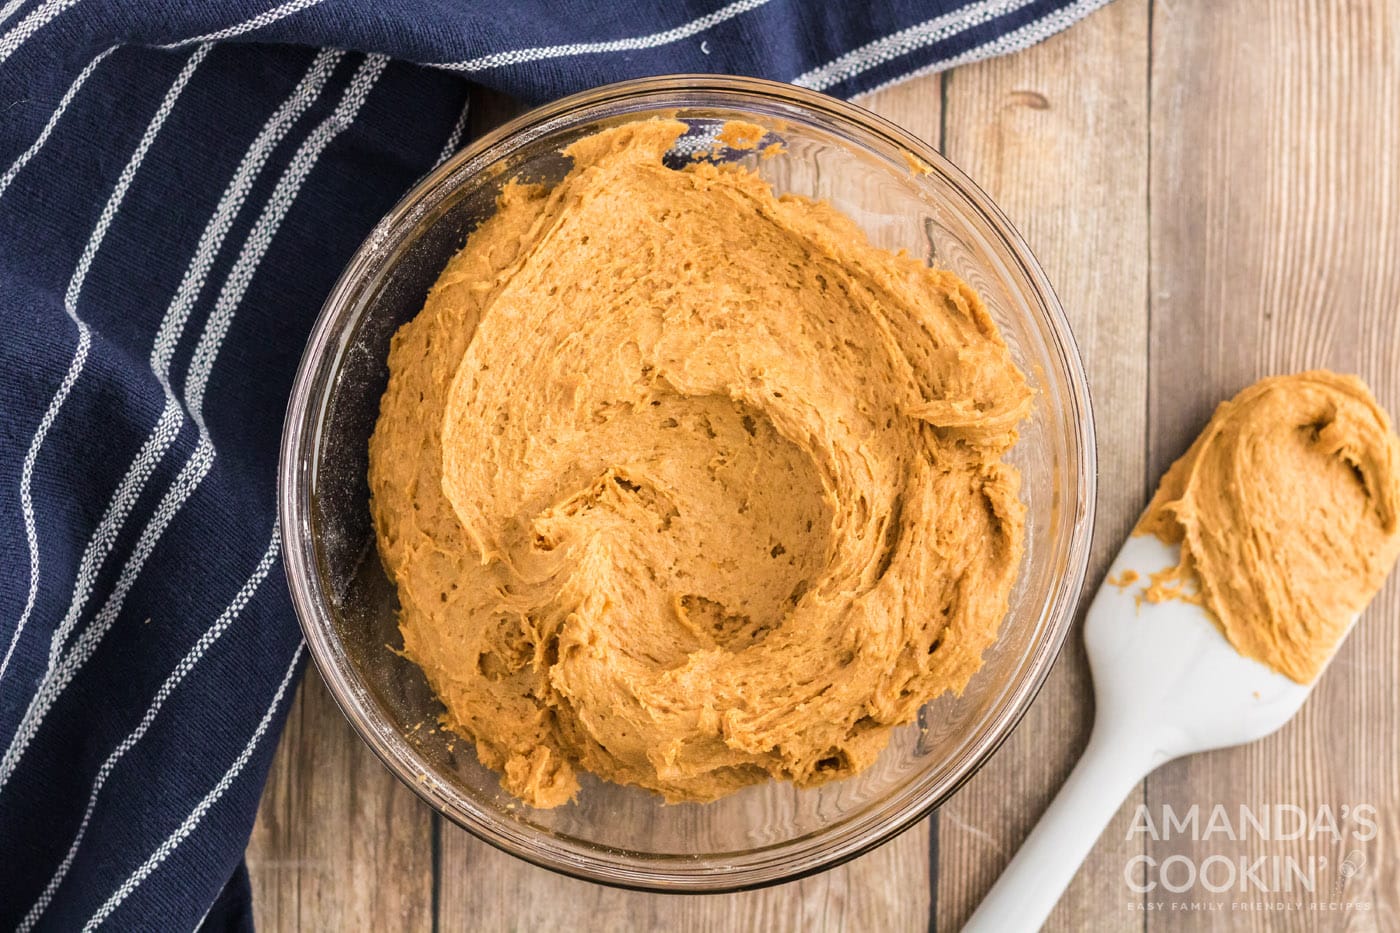 pumpkin puree mixed with cake mix in a bowl